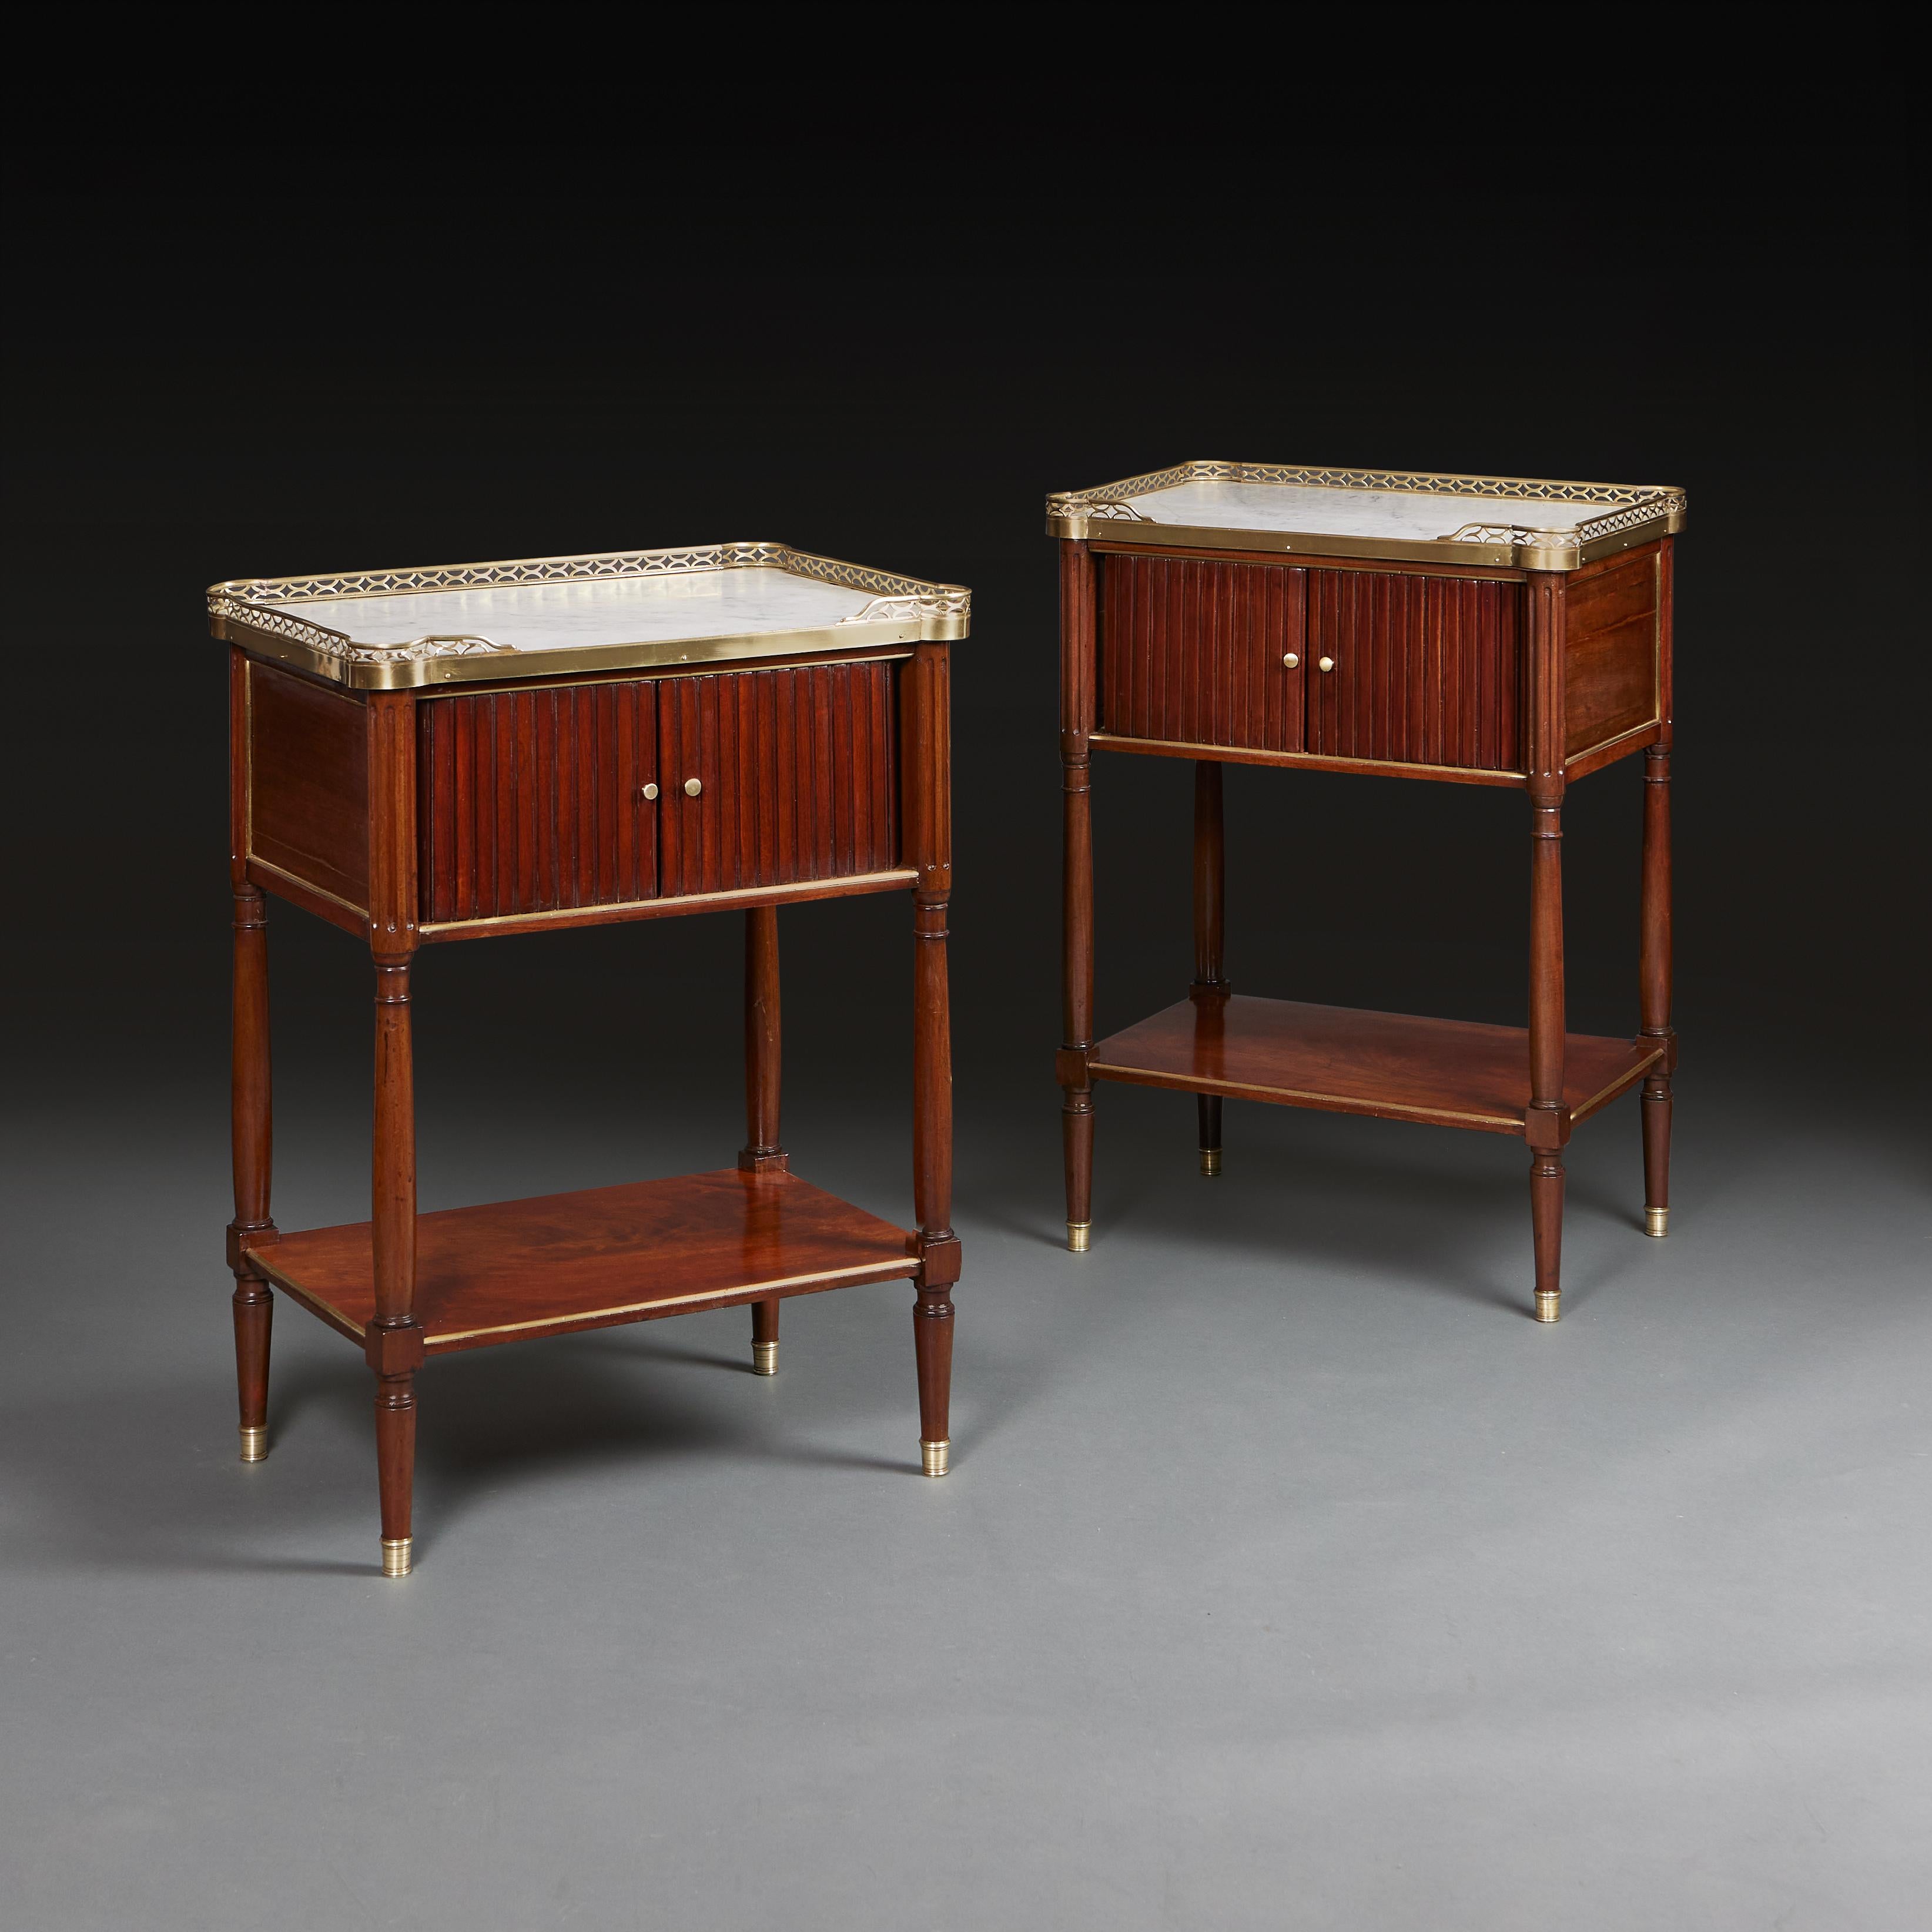 France, circa 1890

A fine pair of late nineteenth century mahogany bedside tables, with sliding tambour fronts revealing a storage space, with inset white marble tops surrounded by pierced brass galleries, with lower tier and all supported on